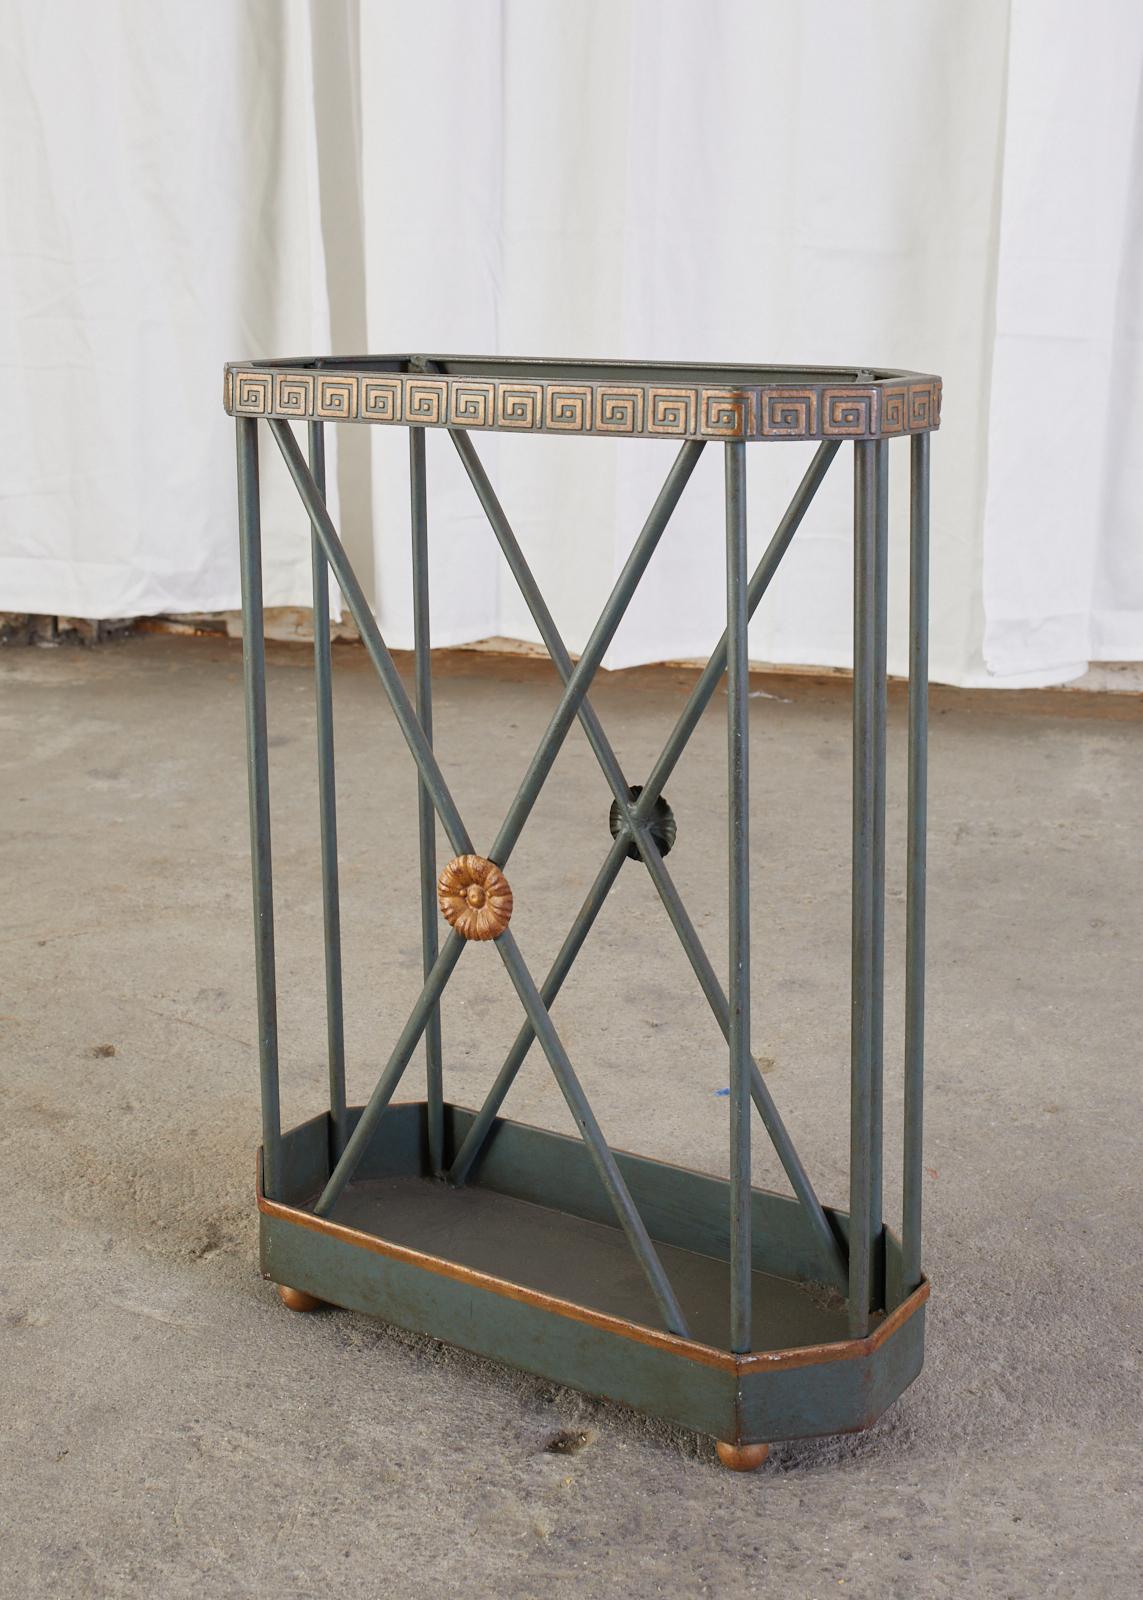 Distinctive French painted umbrella stand or cane walking stick stand made in the neoclassical taste. The iron stand features on X-motif design centered by a rosette on each side. The top has a Greek key motif around the rim. The iron has a dark